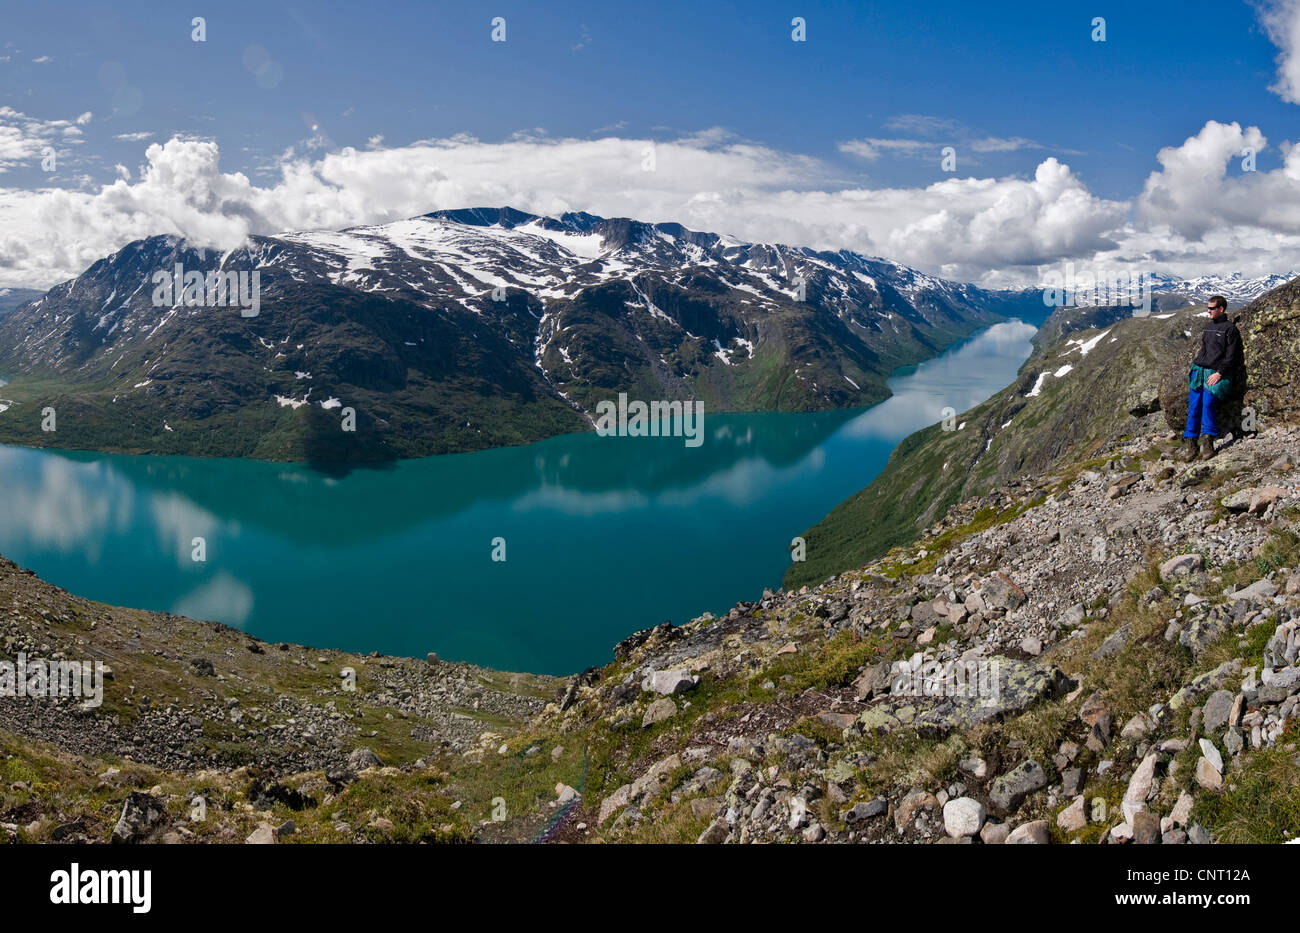 Jotunheimen with the high altitude lake Gjende on the trail over Besseggen, one of the most famous mountain hikes in Norway, Norway, Oppland, Gjendesheim Stock Photo